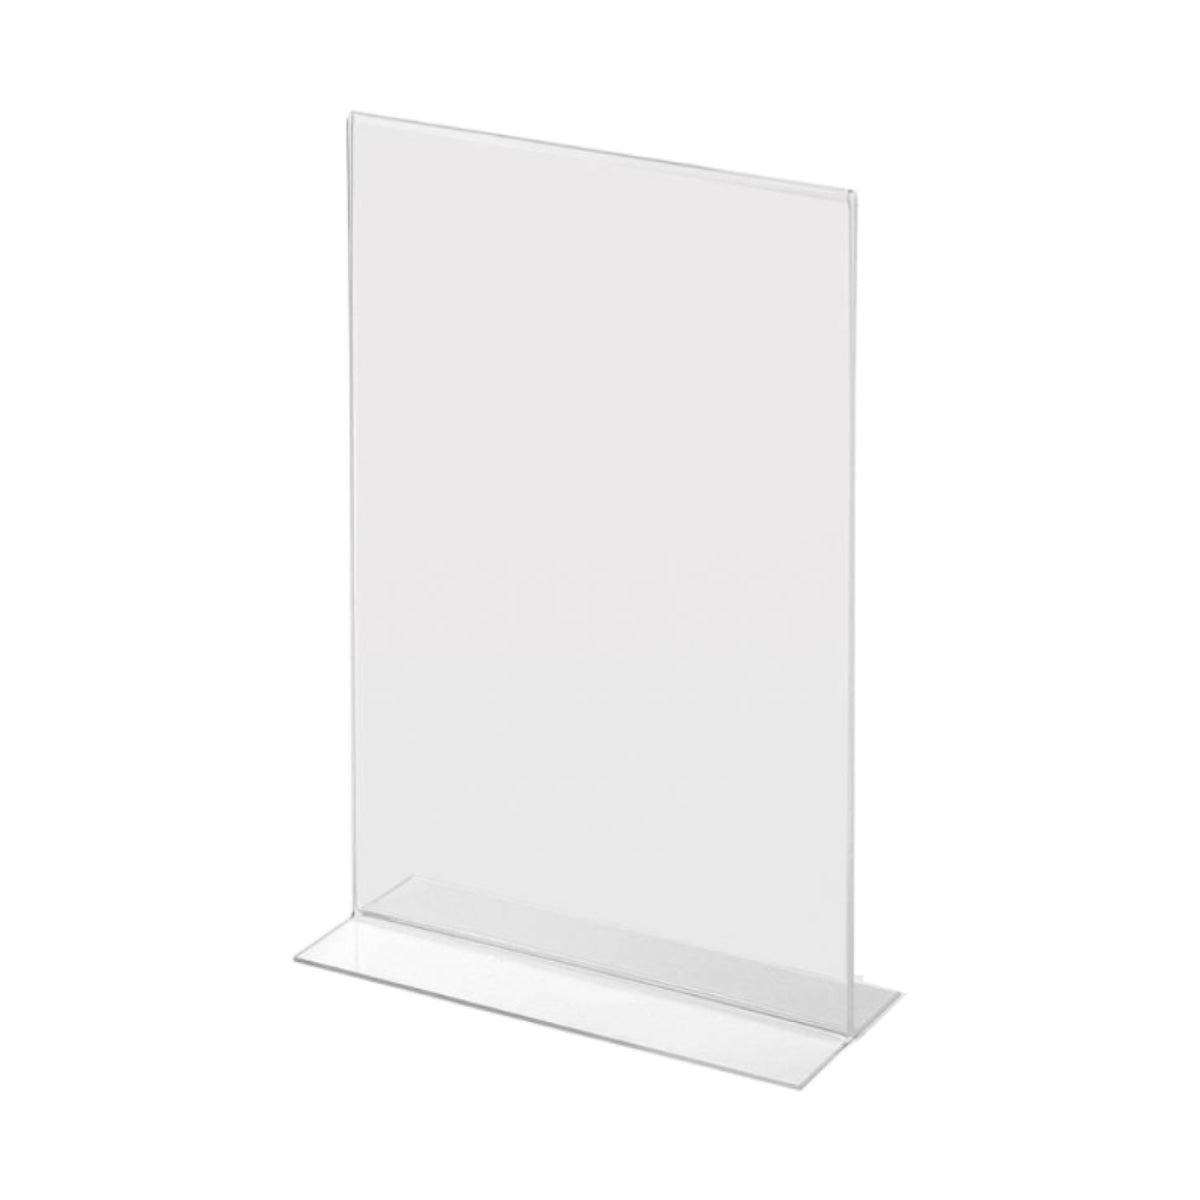 Acrylic Sign Holder 2 Sided T-Type, A3 297 x 420 mm